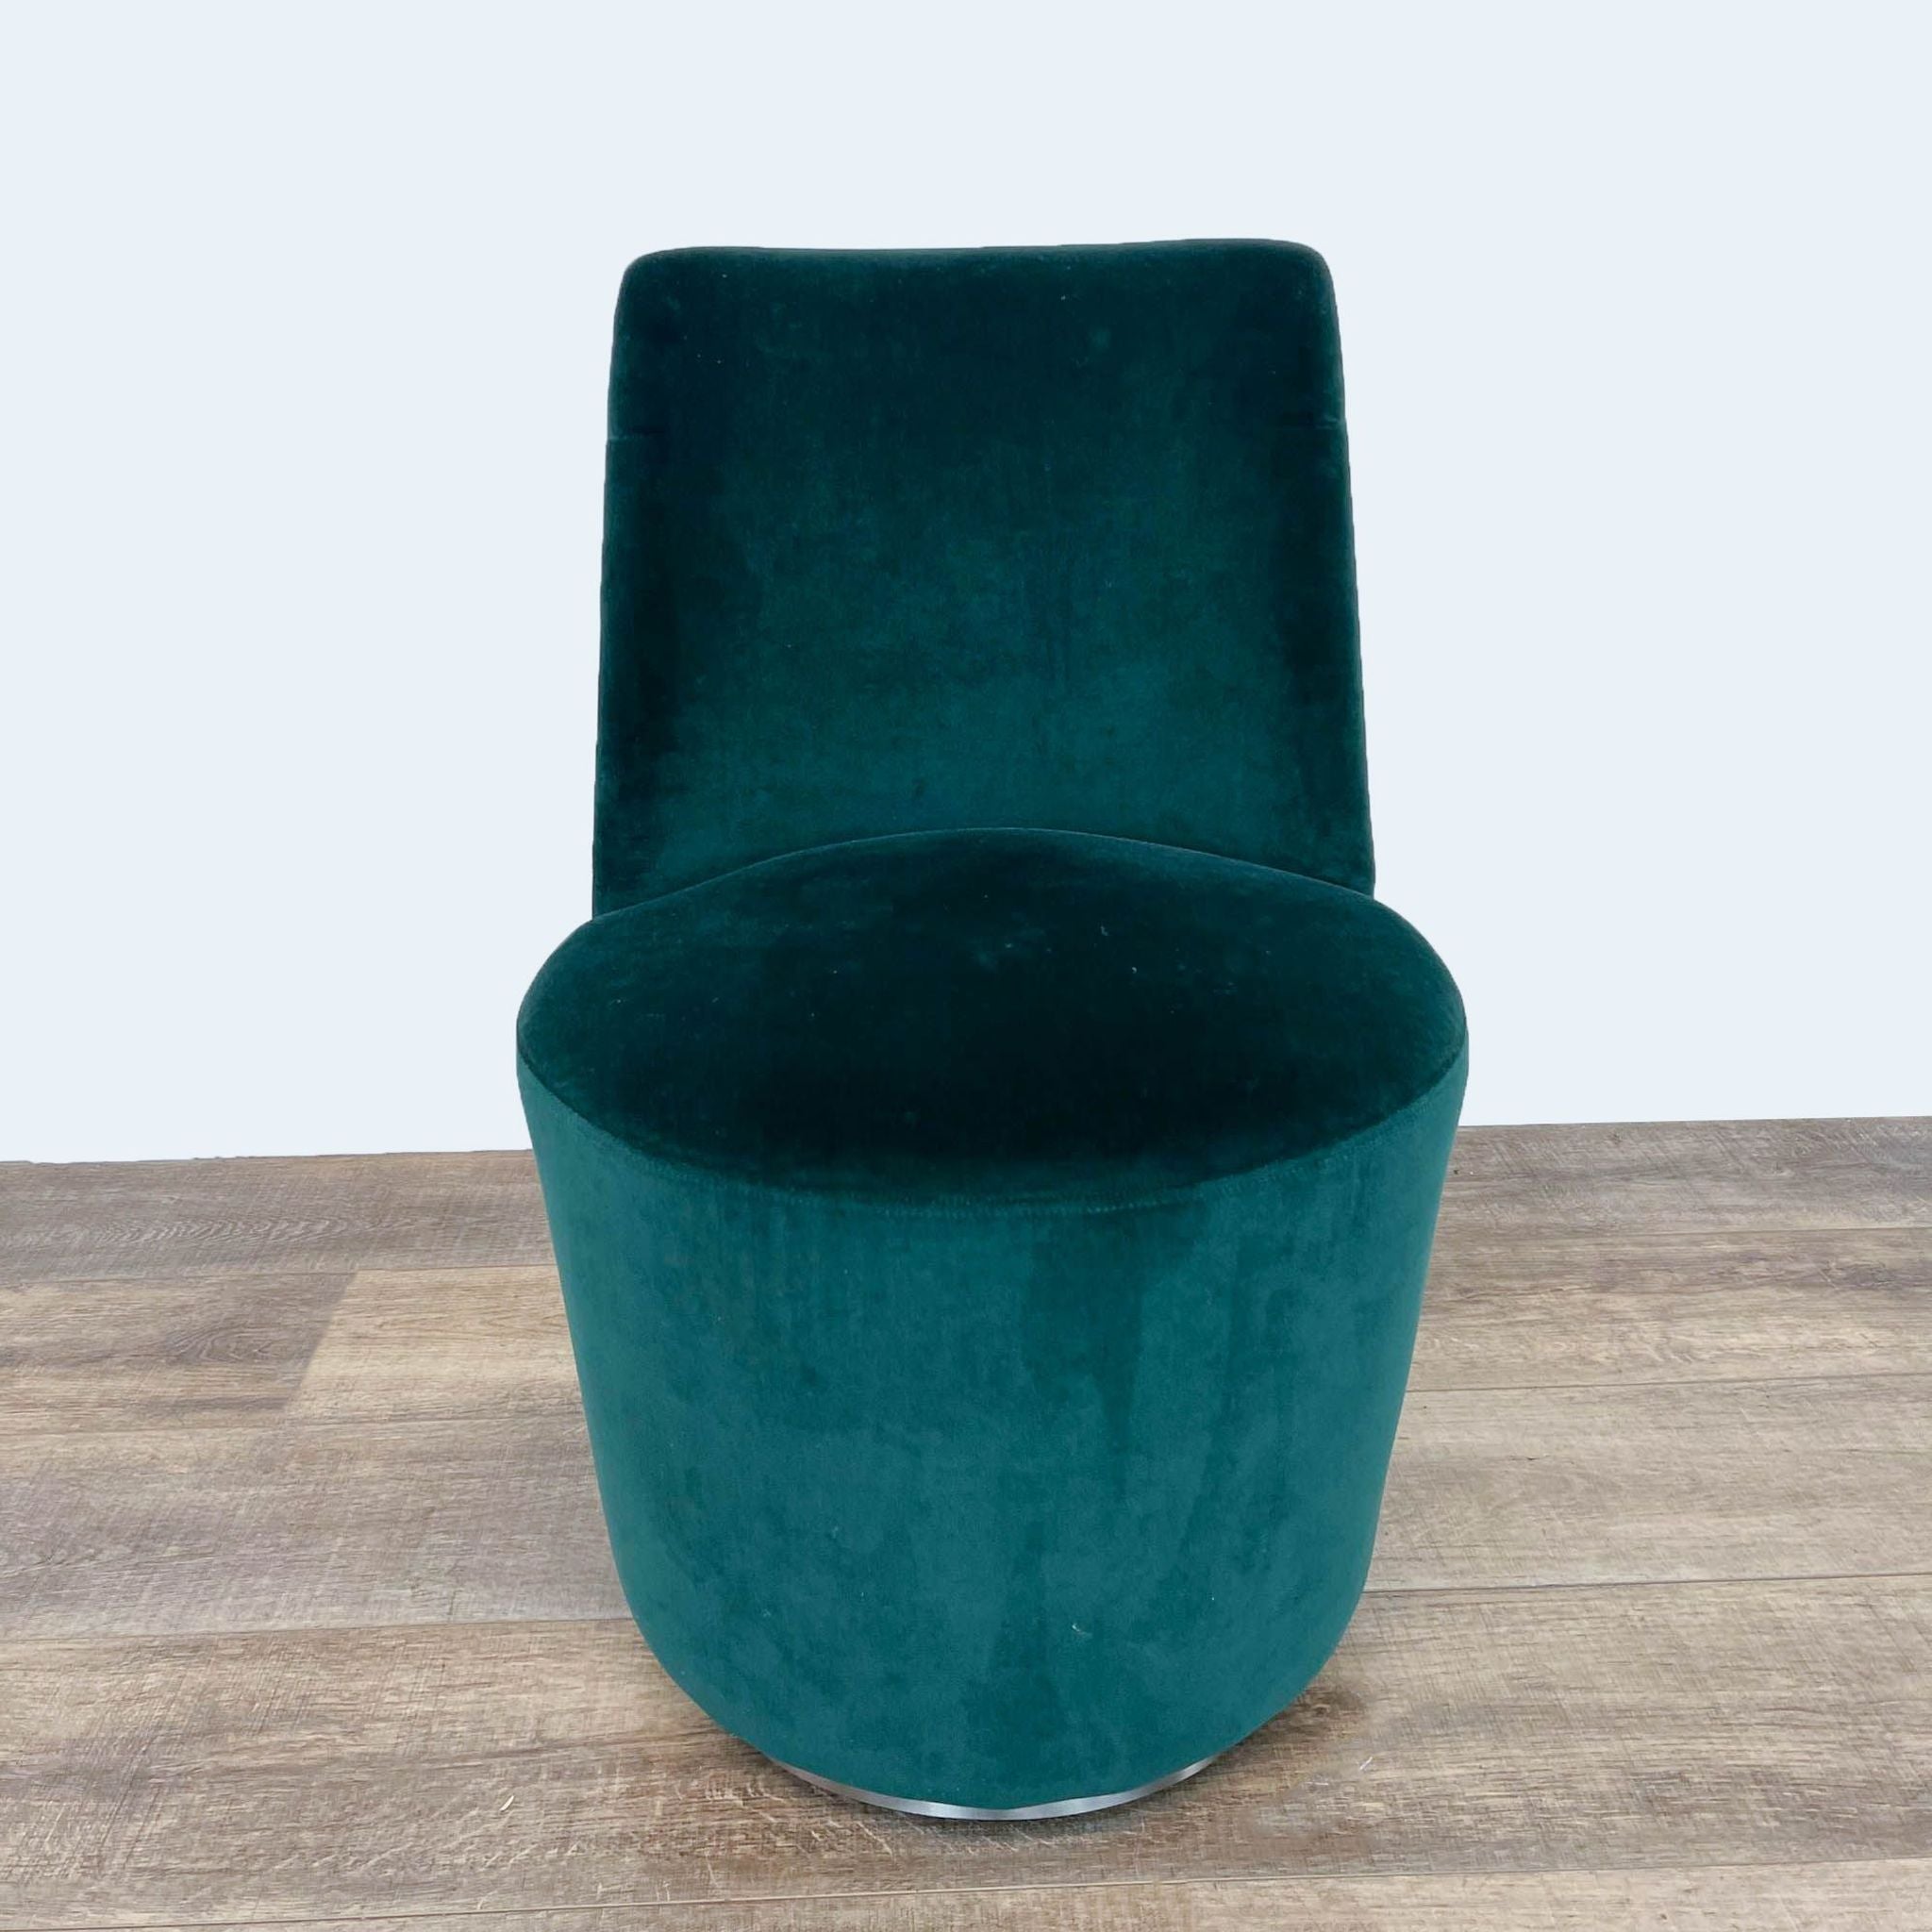 Alt text 1: Plush hunter green velvet dining chair by Crate & Barrel with cushioned seating and a solid-body design on a wooden floor.